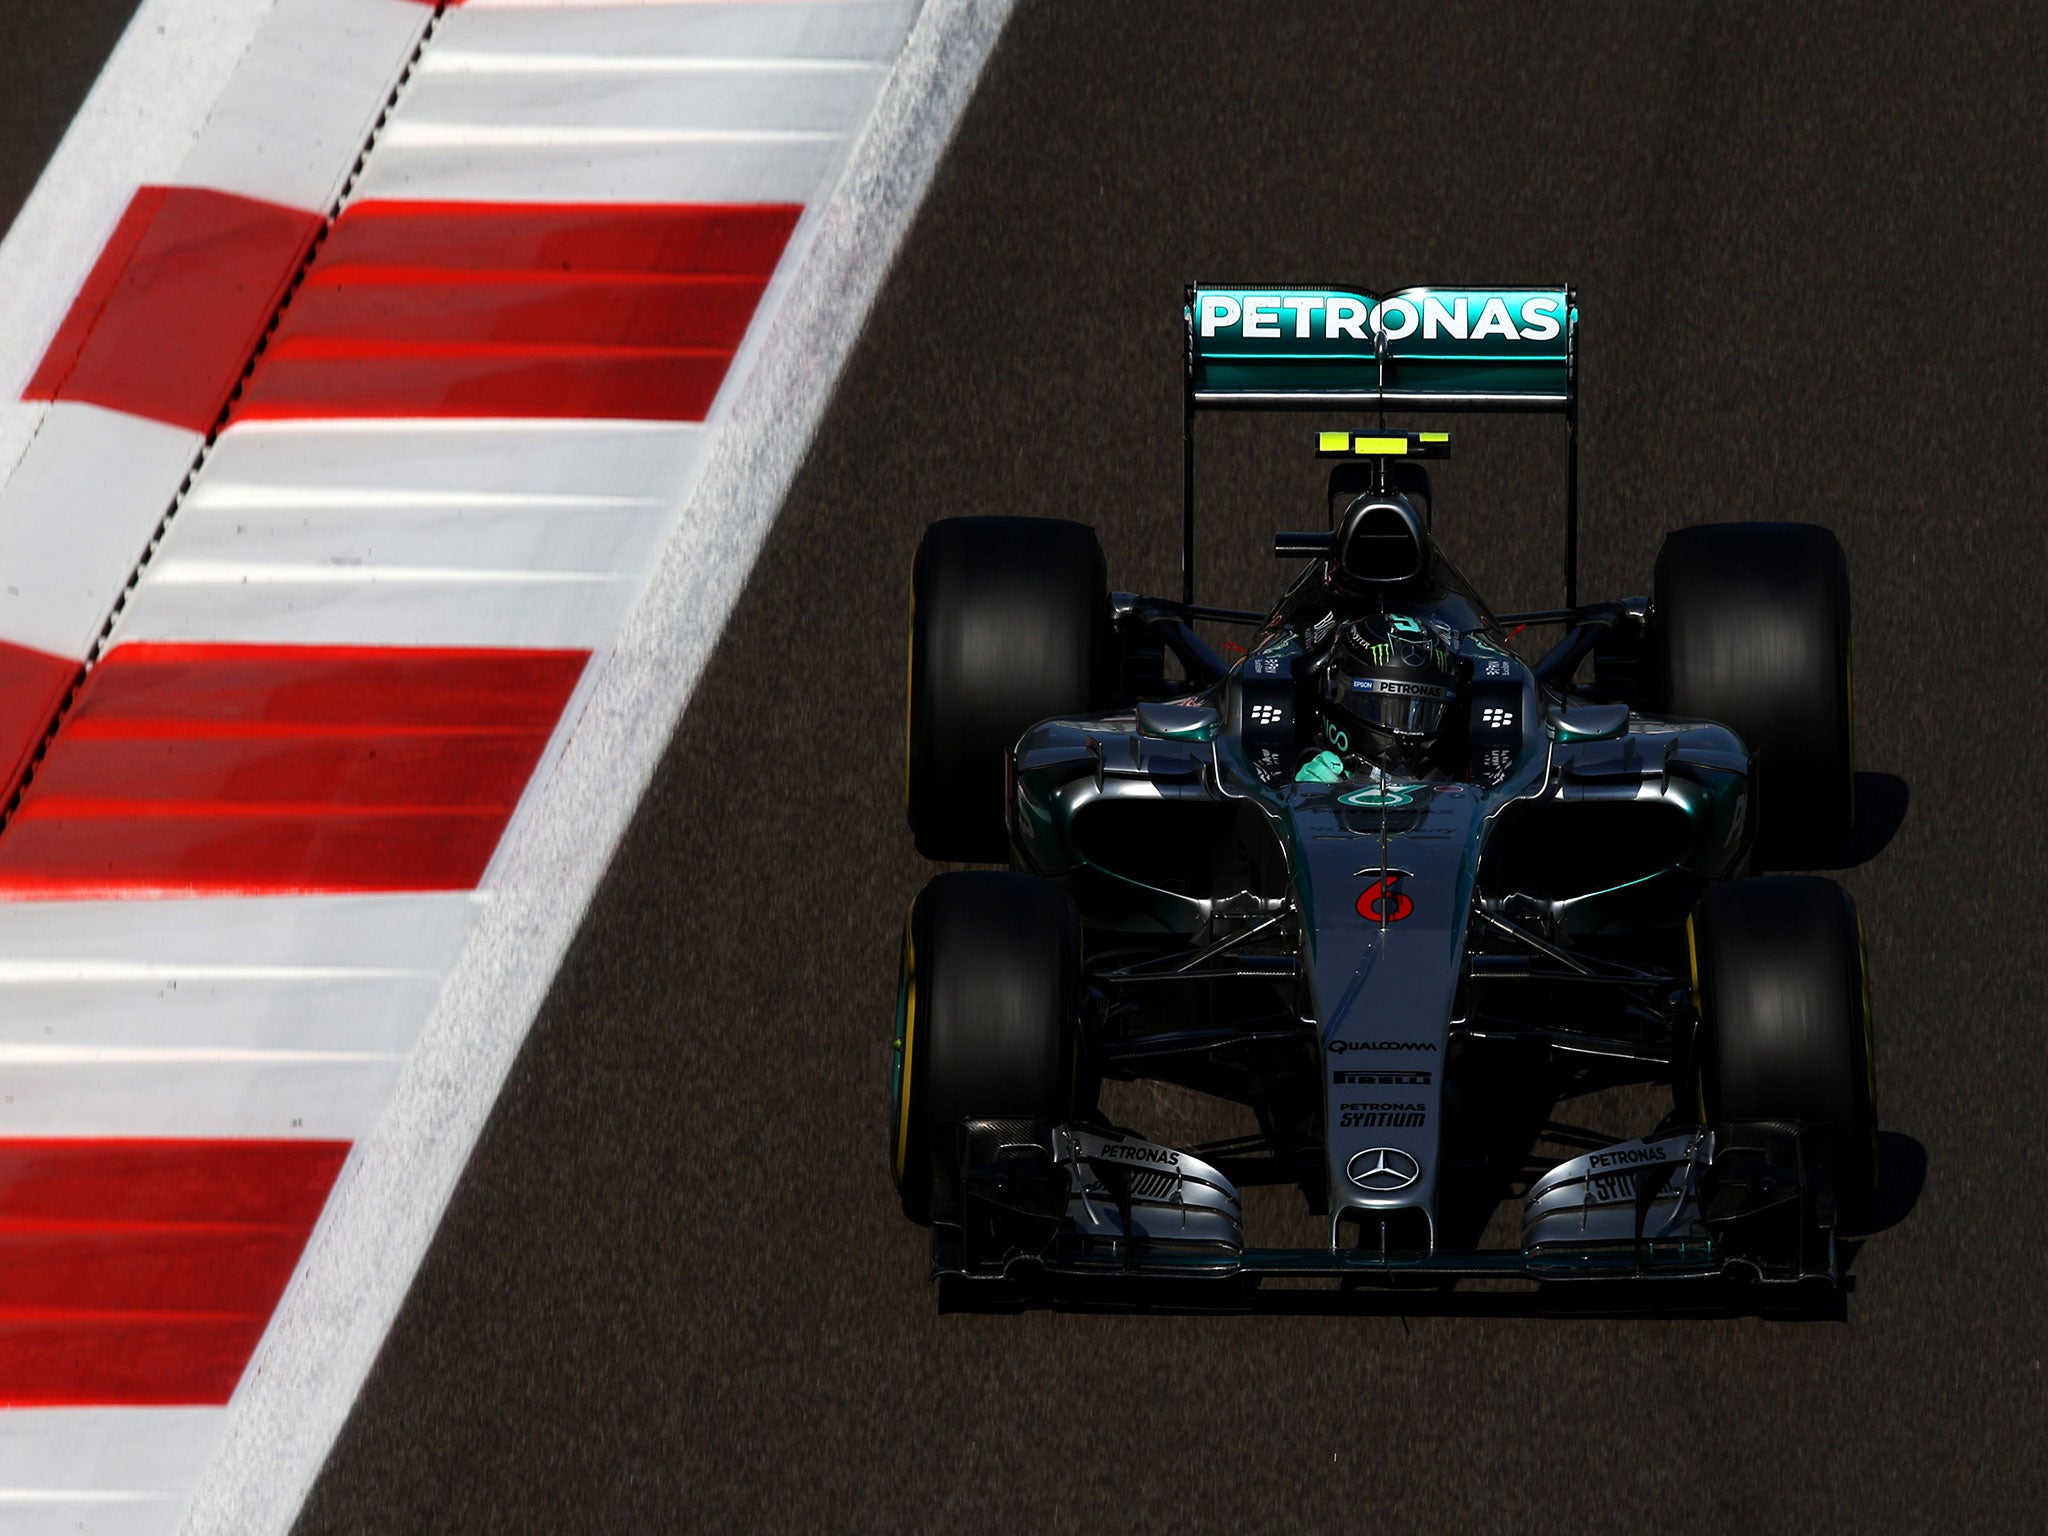 Nico Rosberg finished fastest in second practice for the Abu Dhabi Grand Prix